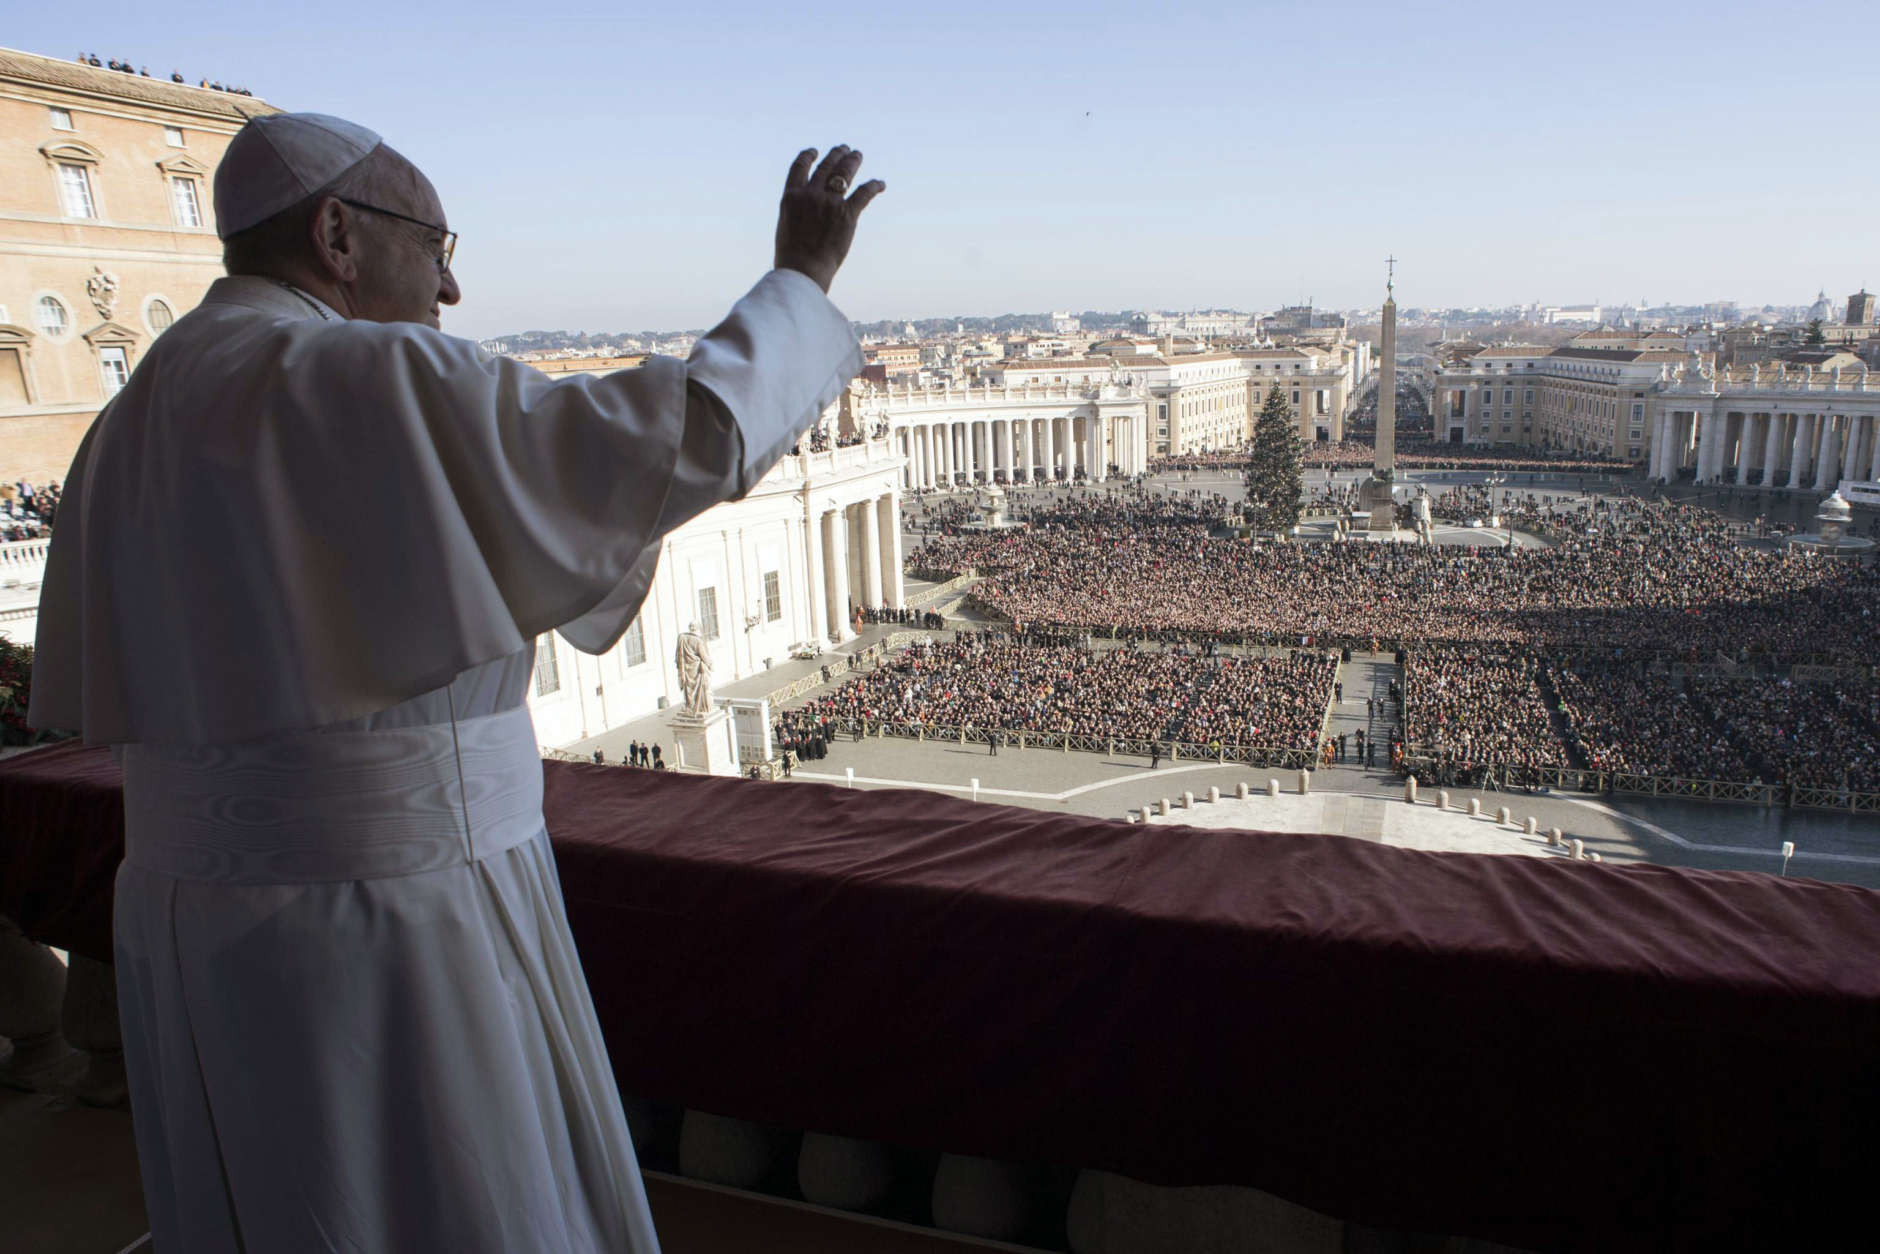 Pope Francis waves to faithful during the Urbi et Orbi (Latin for ' to the city and to the world') Christmas' day blessing from the main balcony of St. Peter's Basilica at the Vatican, Monday, Dec. 25, 2017. (L'Osservatore Romano/Pool Photo Via AP)